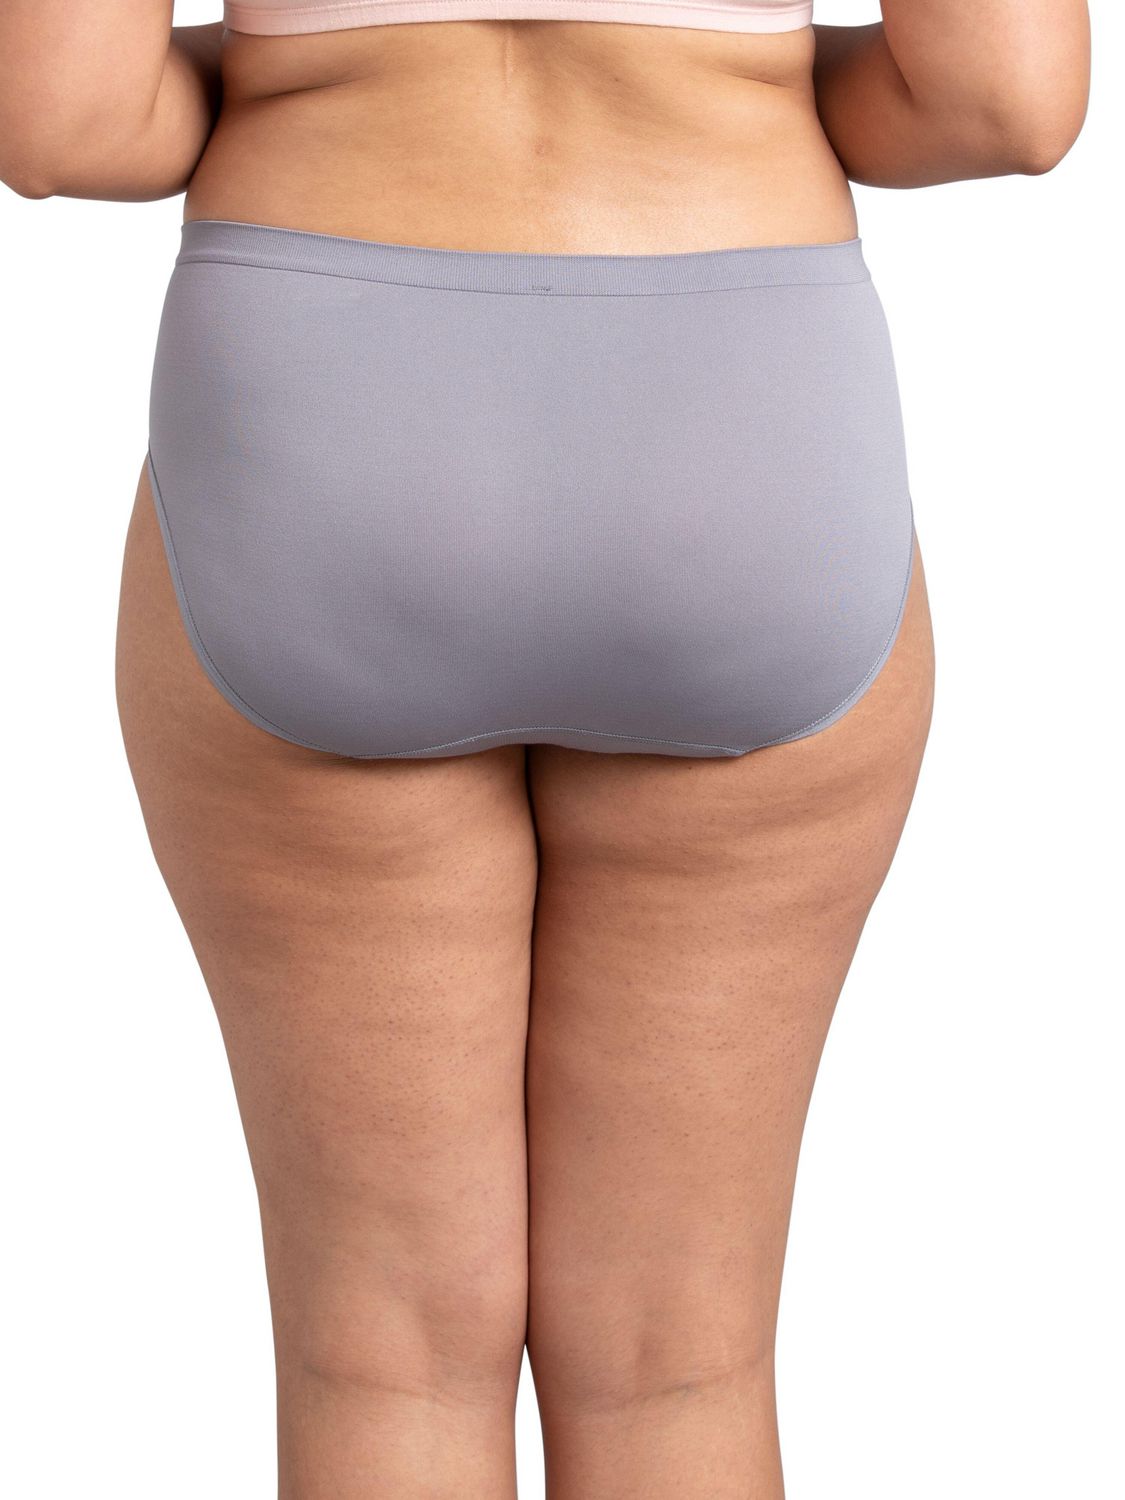 Fruit of the Loom Women's 360 Stretch Seamless Hipster Underwear